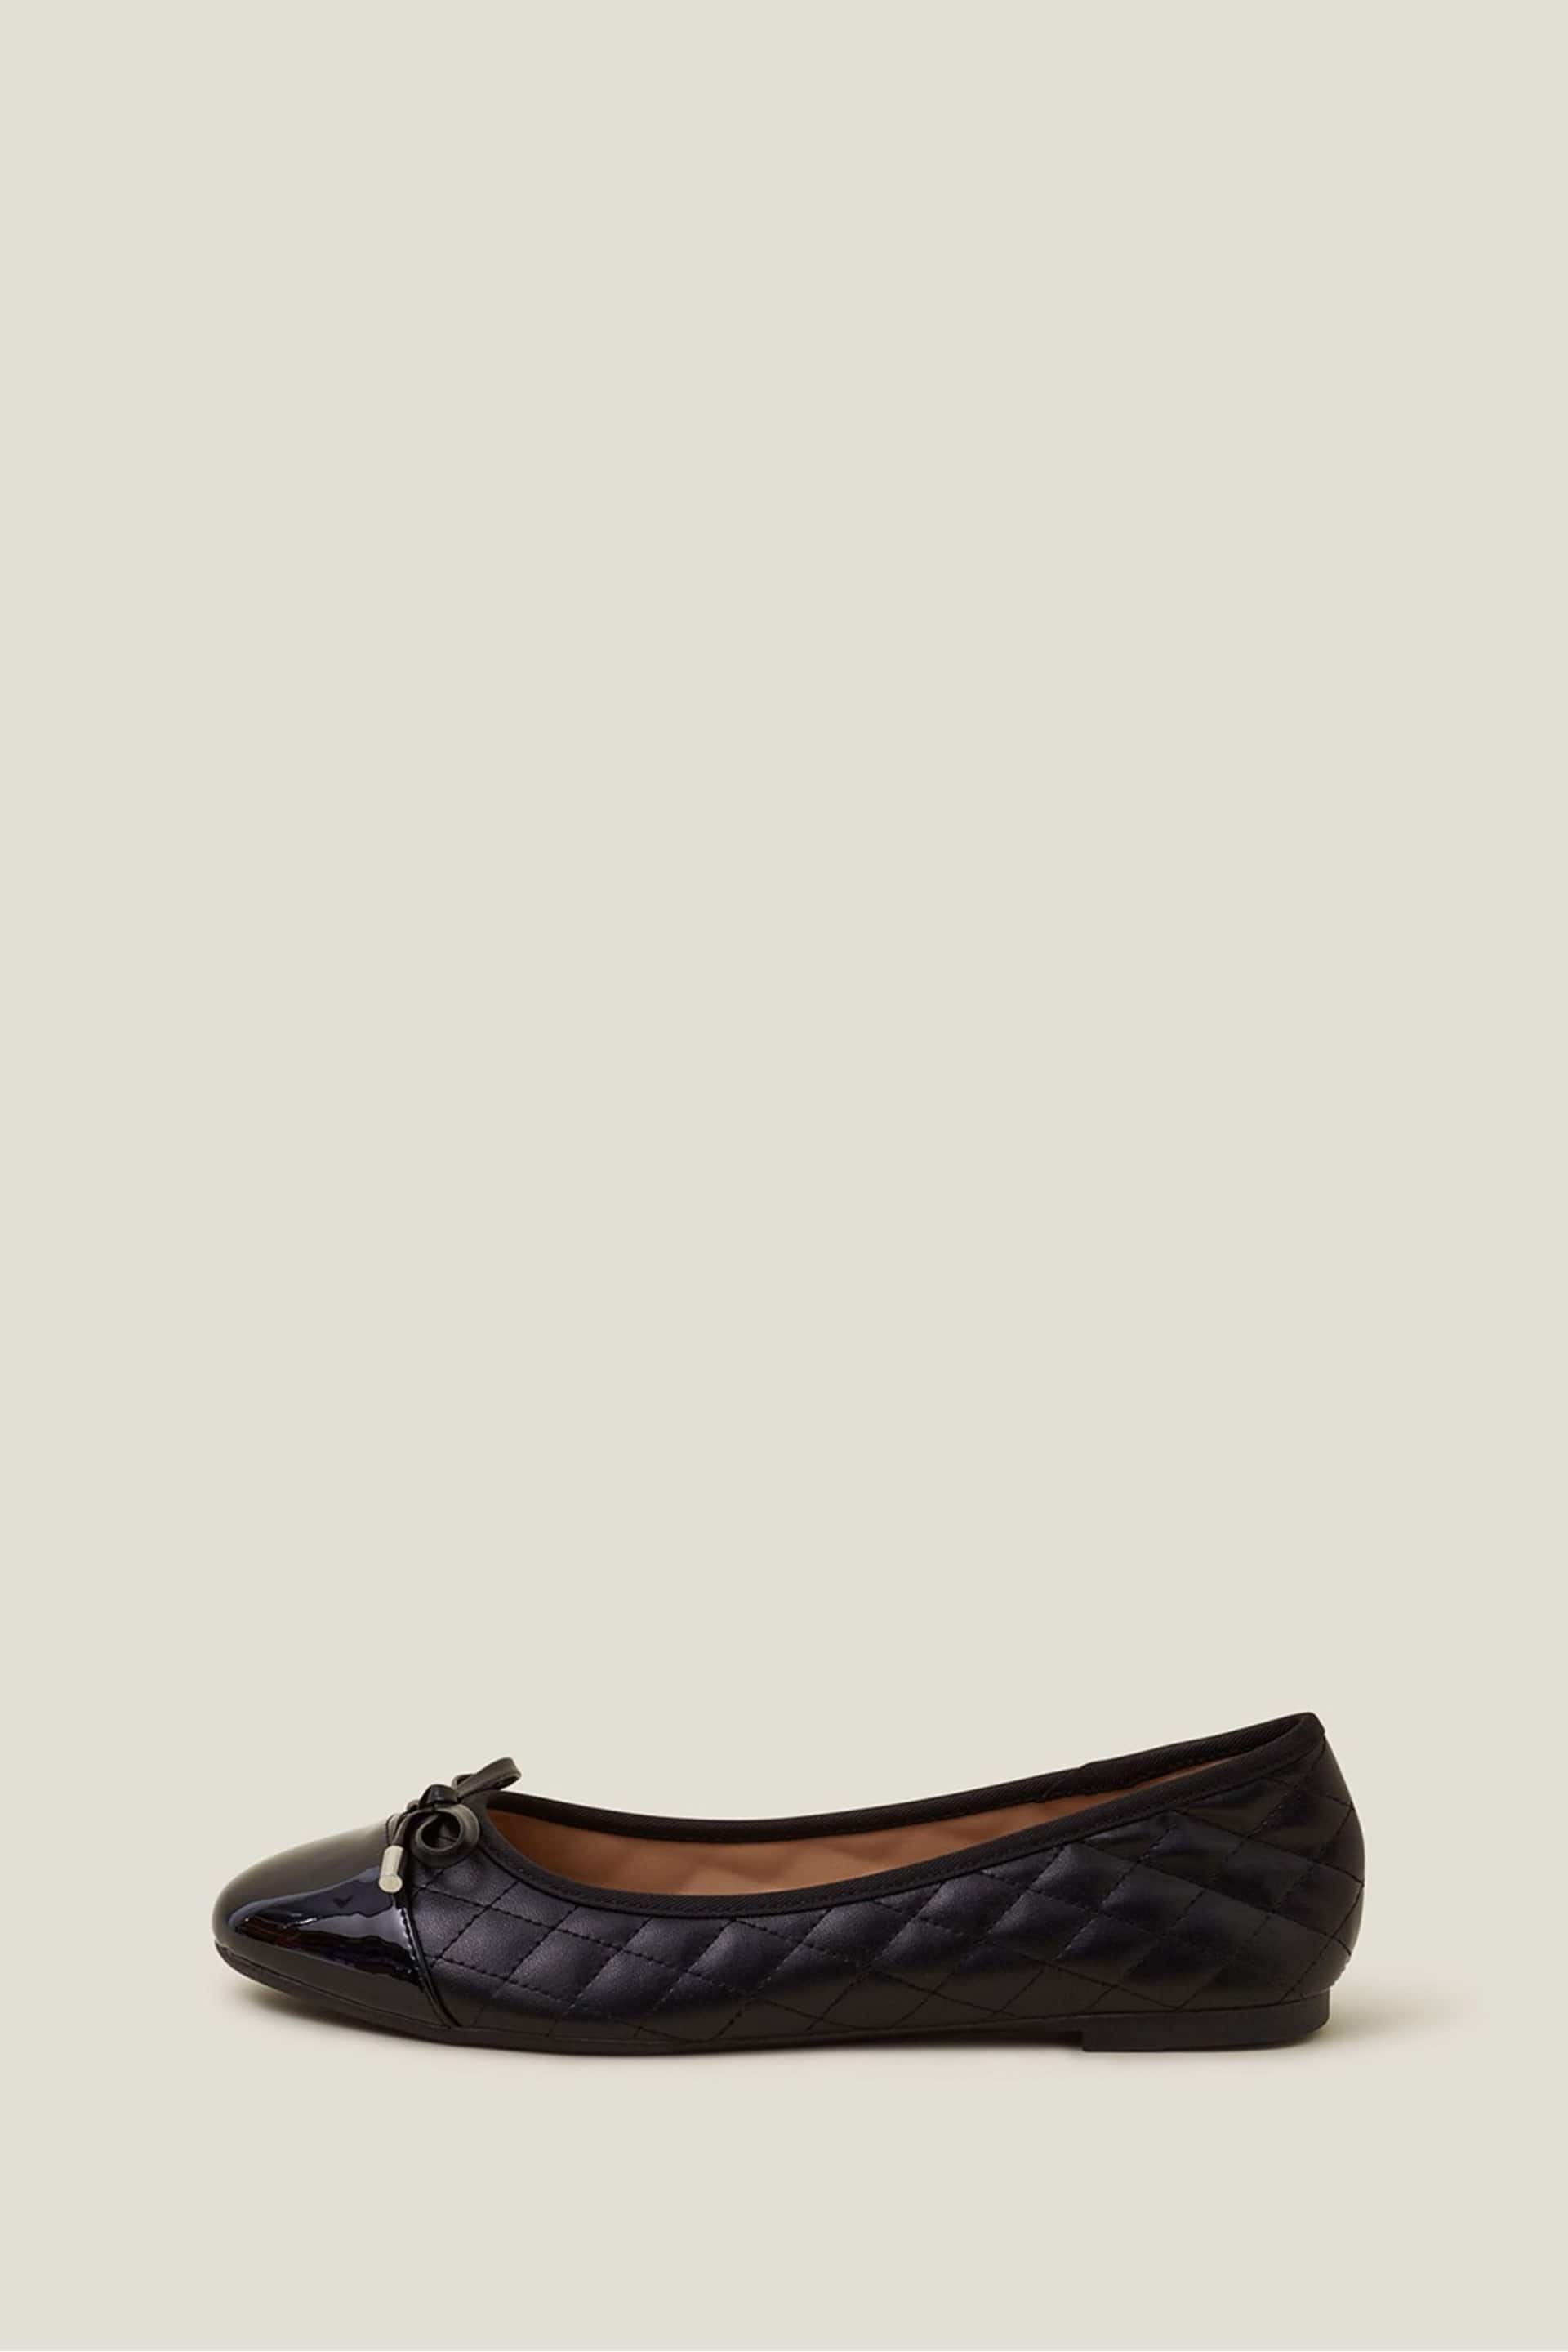 Accessorize Black Quilted Ballet Flats - Image 1 of 4